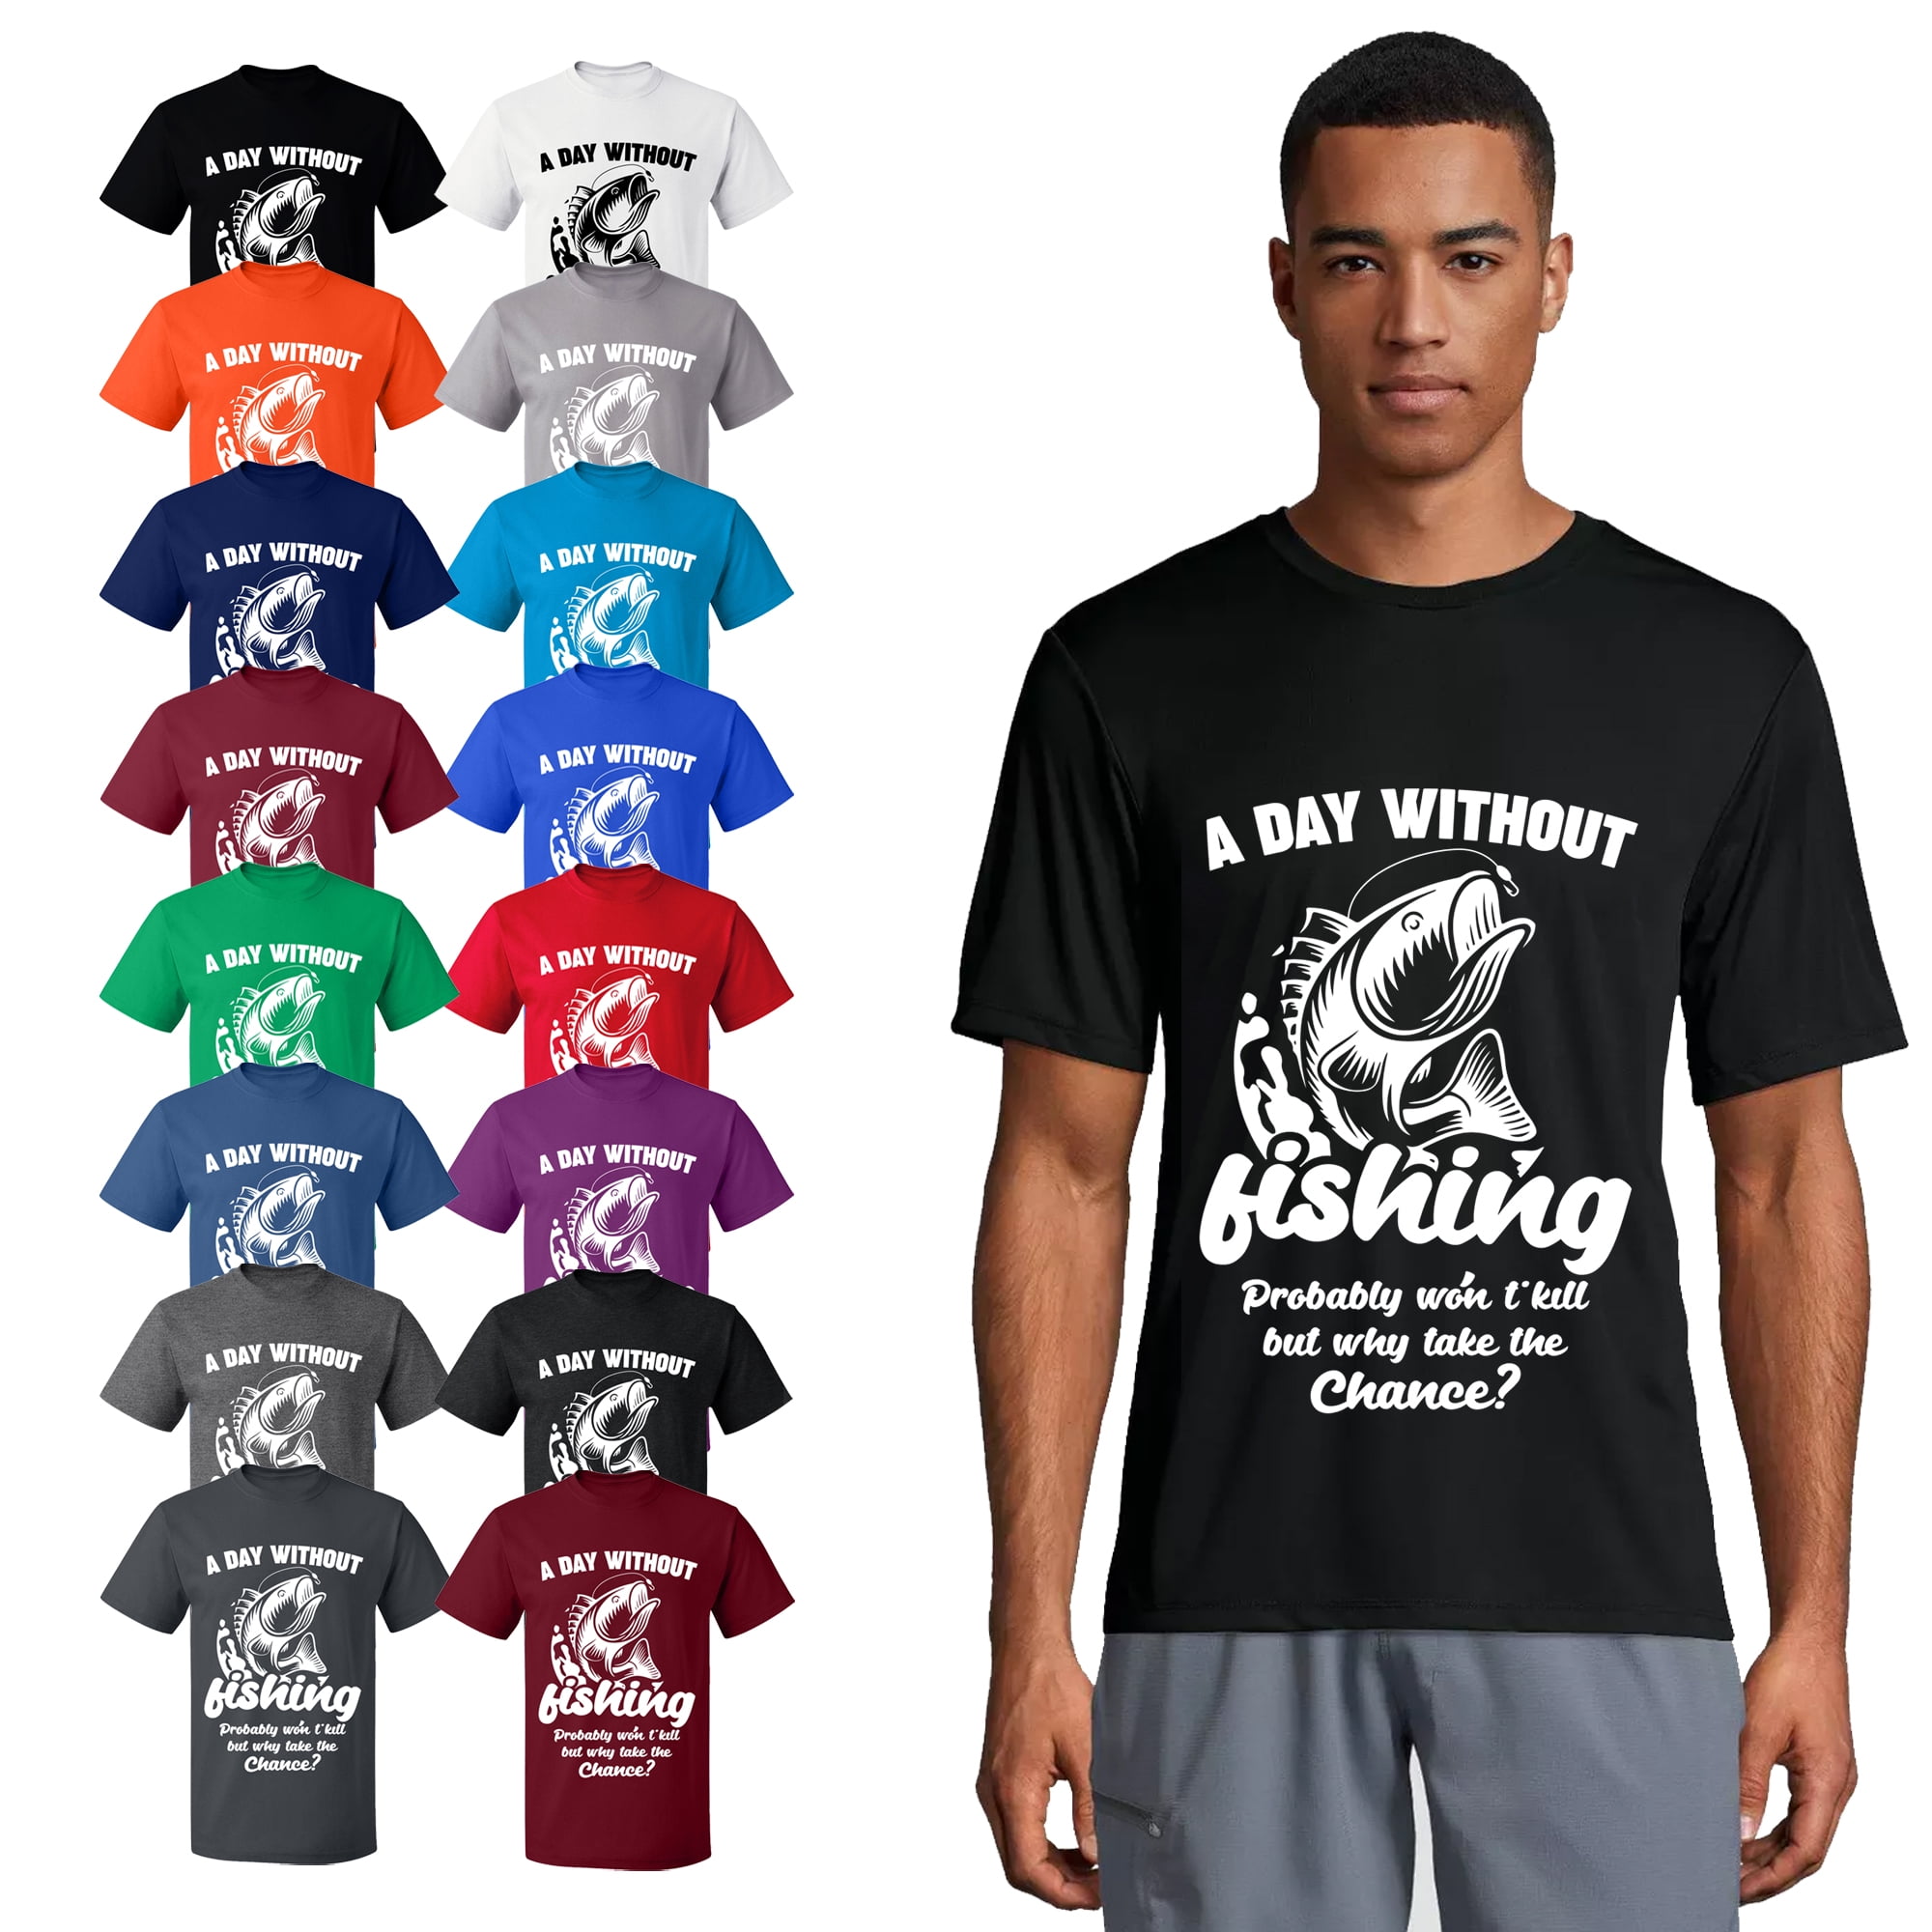 OXI T-Shirt - A Day Without Fishing Basic Casual T-Shirt for Men's